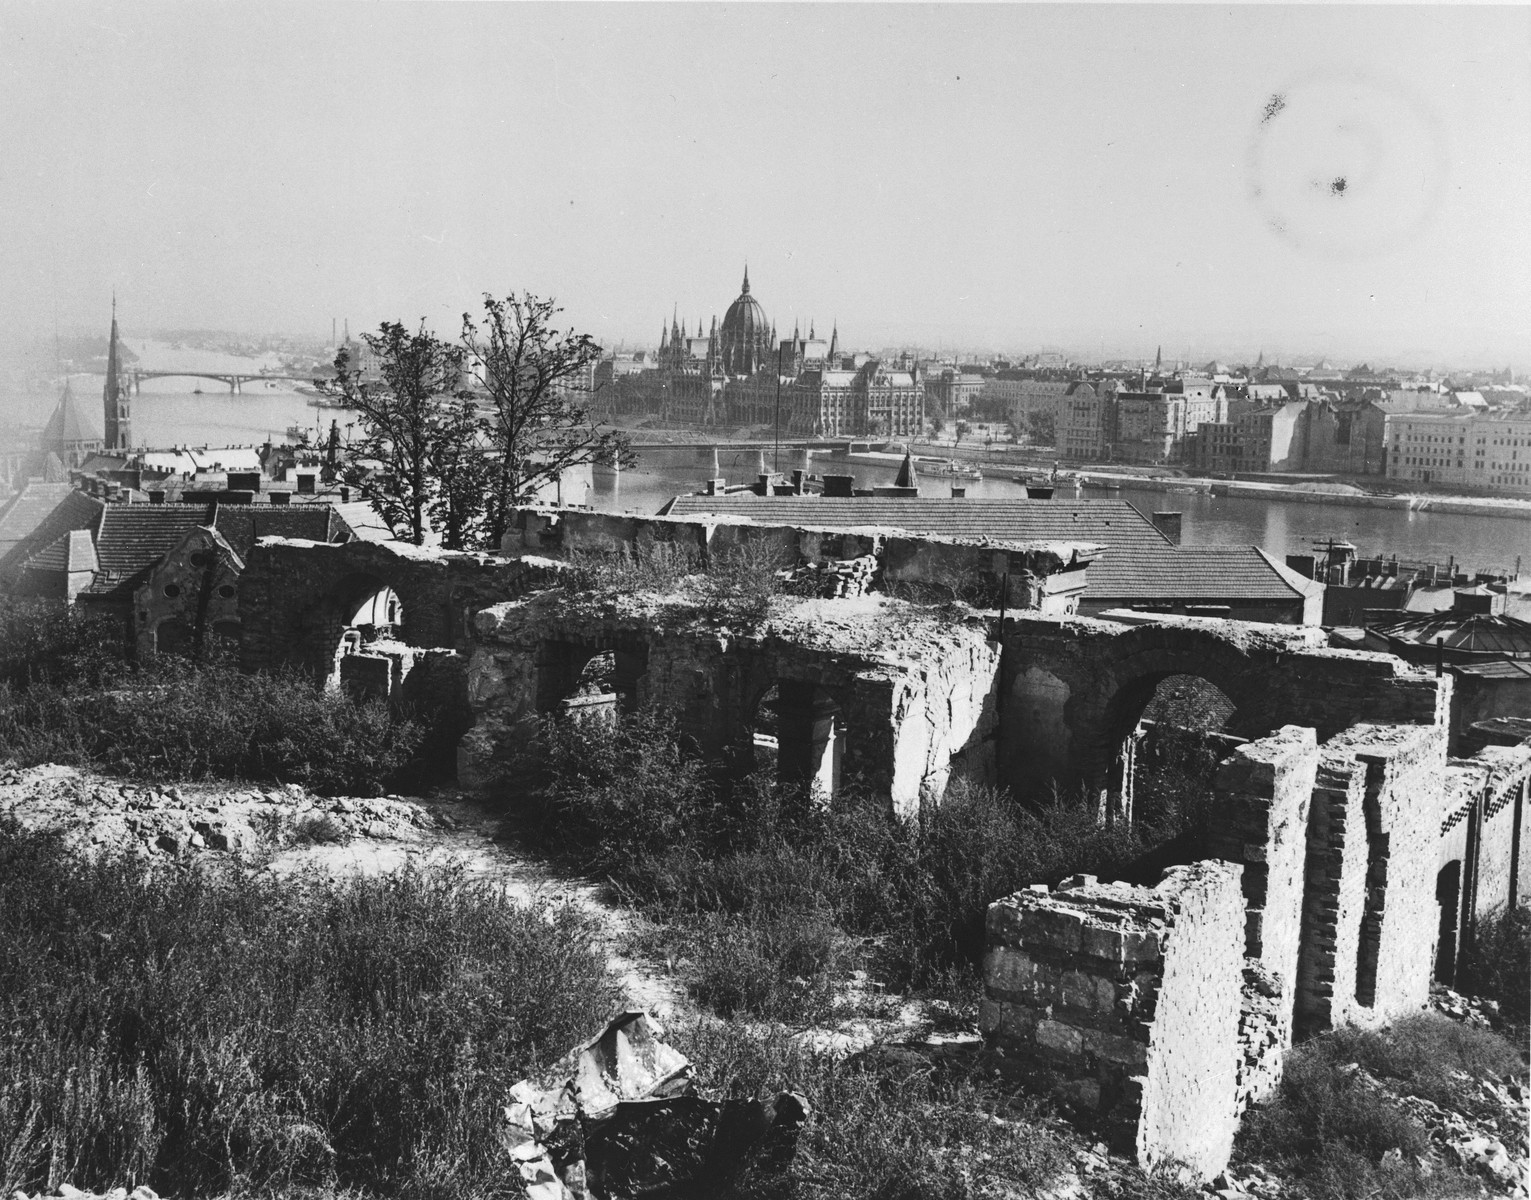 View of the Kossuth Bridge spanning the Danube River in Budapest. 

In the foreground are the ruins of the foreign ministry in Buda.  In the background on the far side of the river is Pest.  The Margaret Bridge may be seen in the distance, in the upper left.  The photo was taken from the site of the British Legation in Buda.